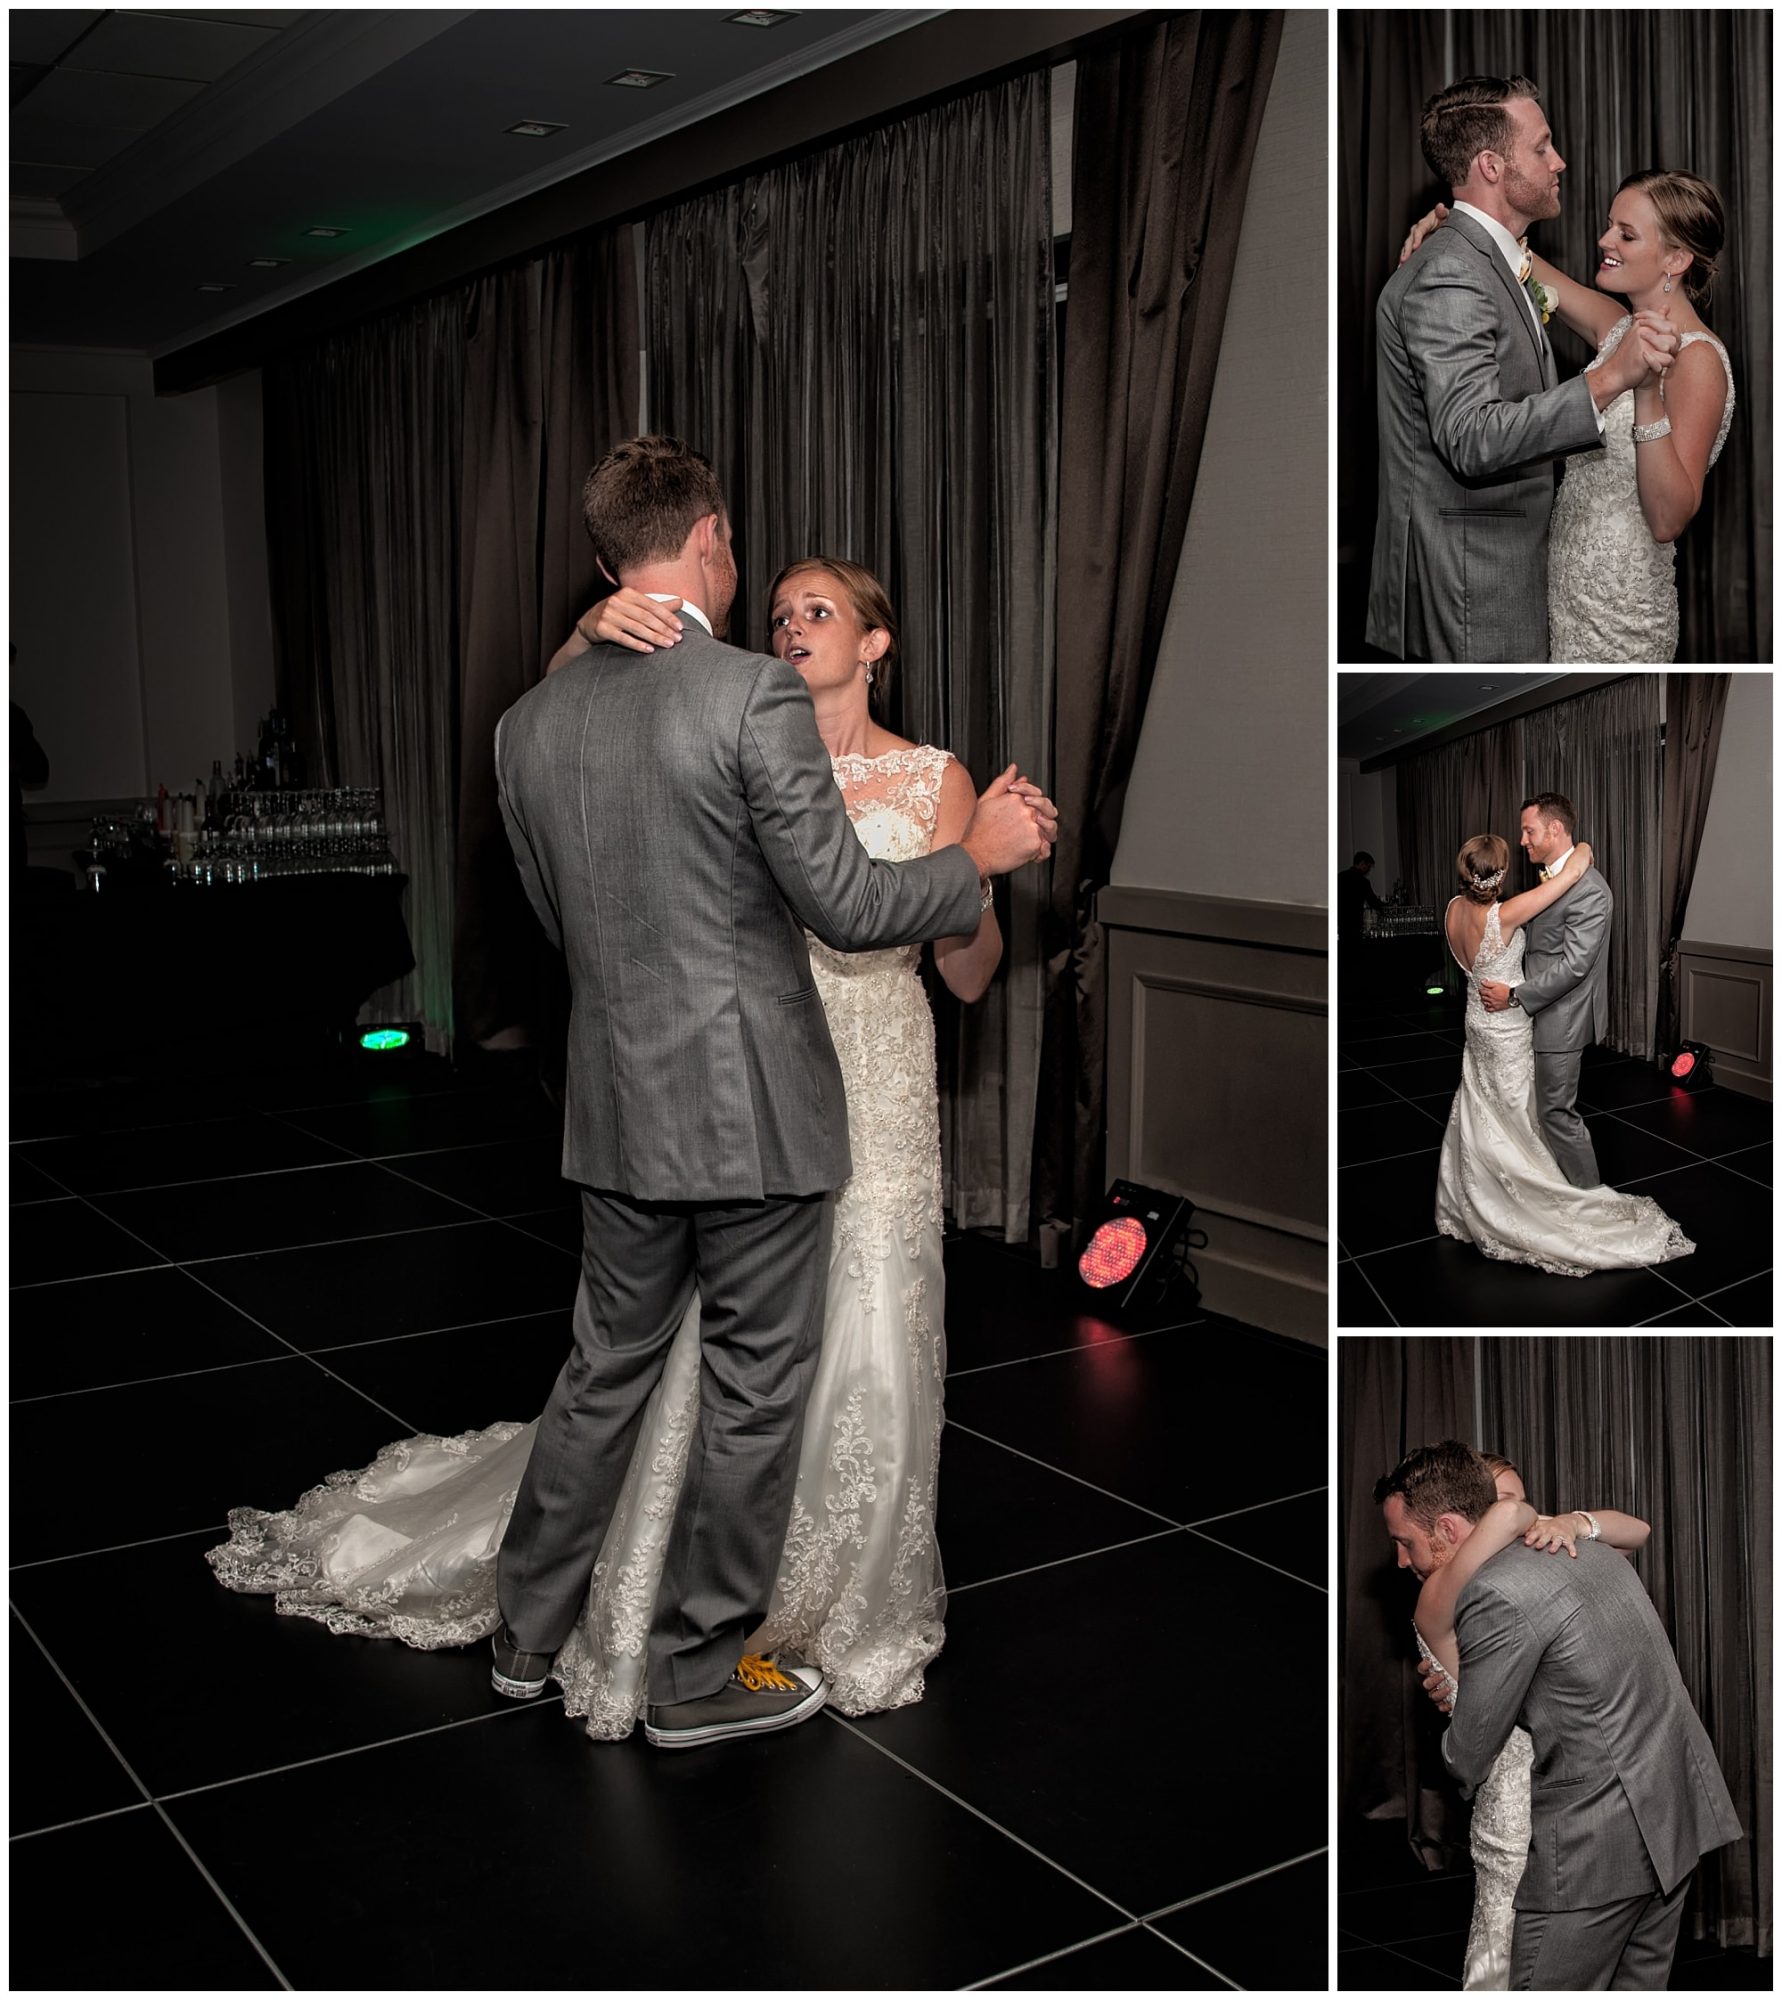 The bride and groom sing to each other during their first dance at their Prince George Hotel wedding.